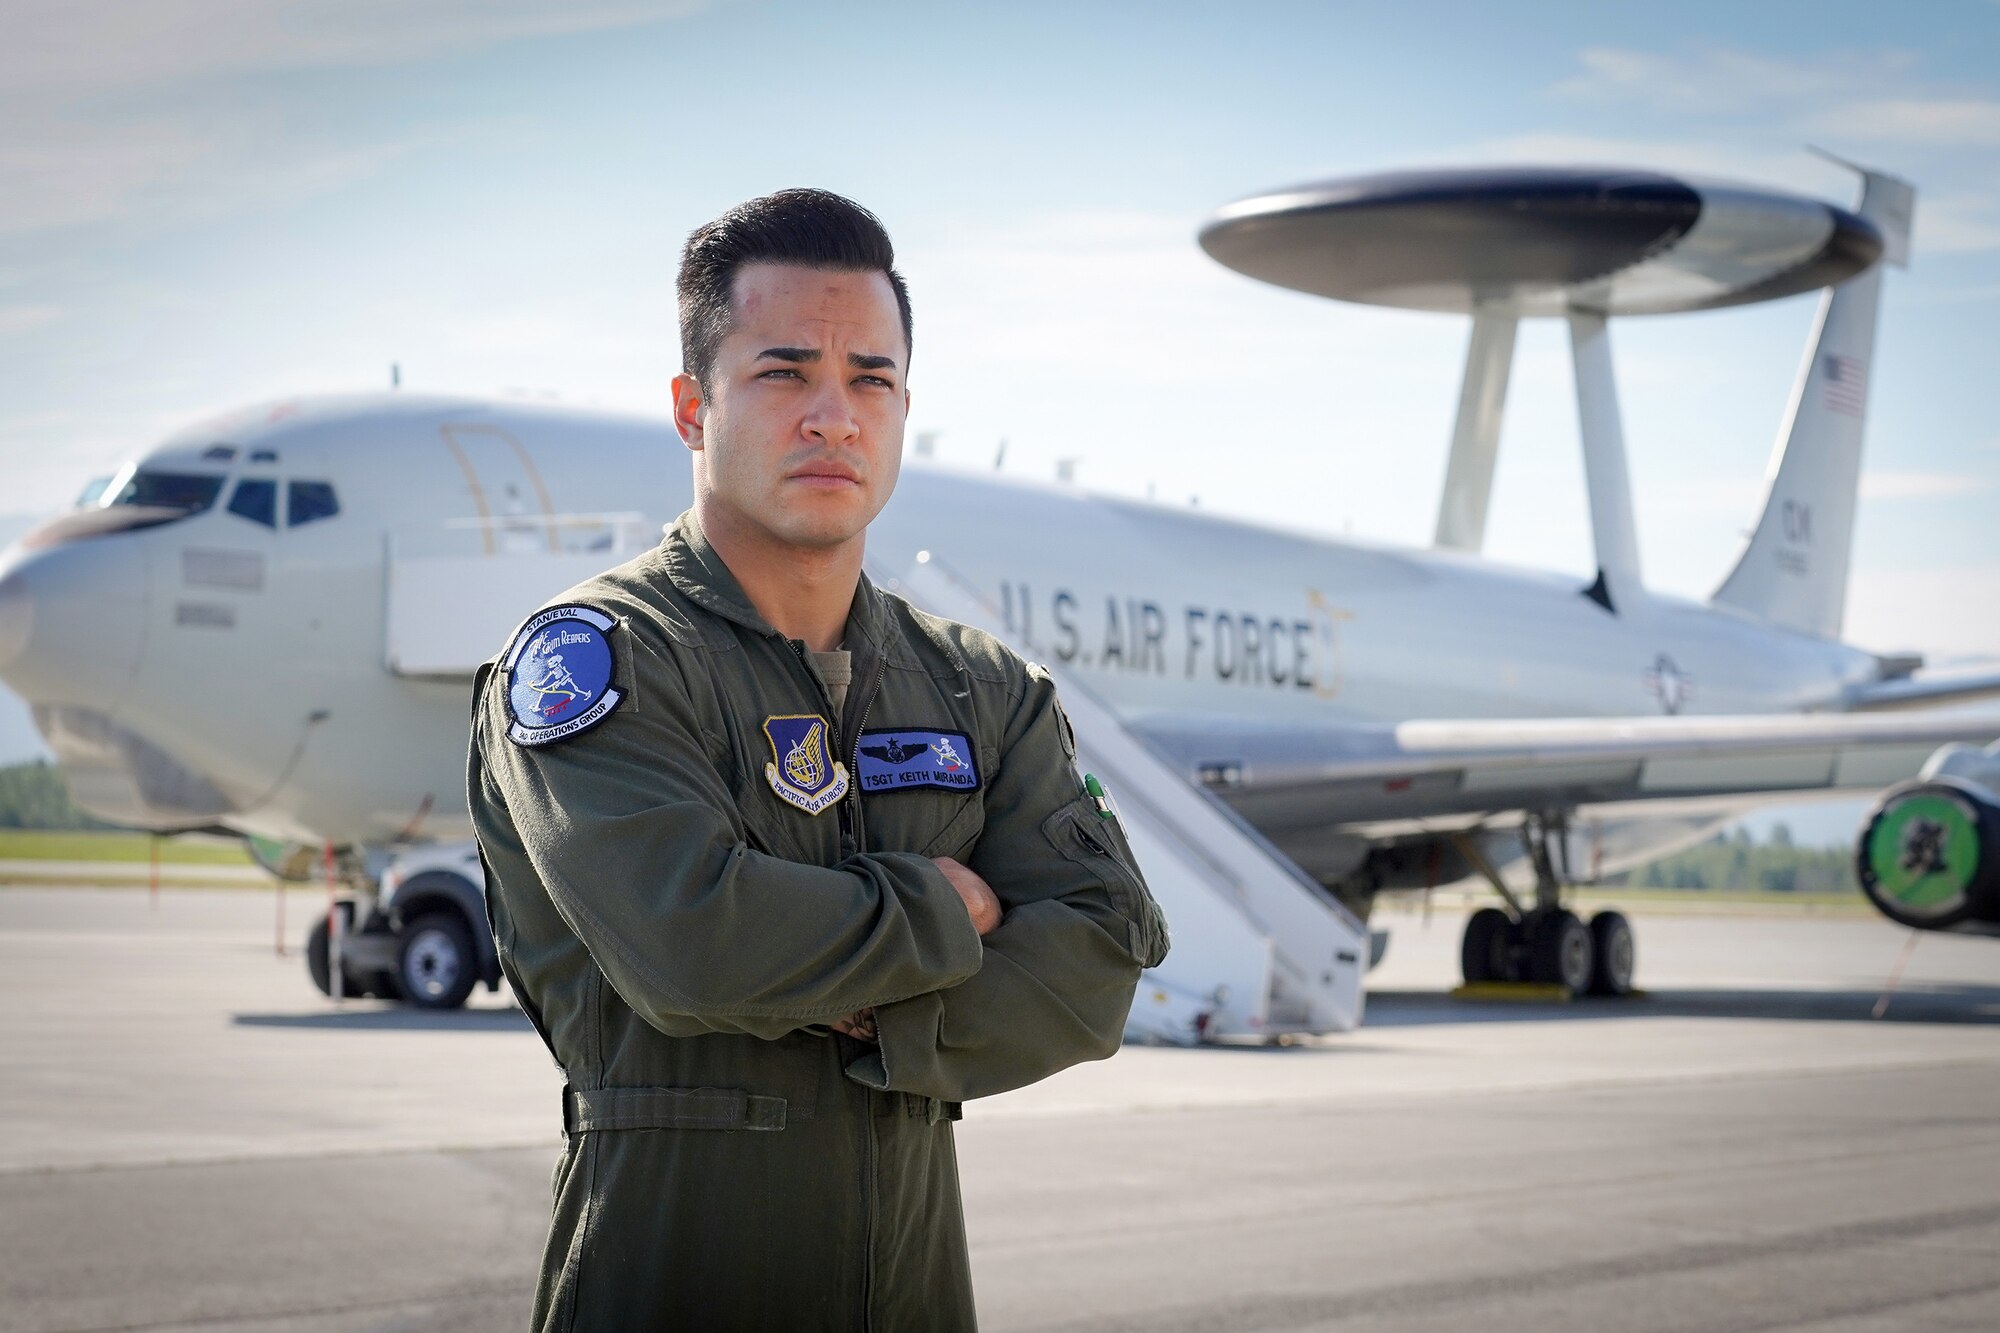 U.S. Air Force Tech. Sgt. Keith Miranda, a 962nd Airborne Air Control Squadron surveillance evaluator, and native of Jacksonville, NC, recently received a one-day notice to test a new Northern American Aerospace Defense network. Miranda's critical role ensured there were no errors and data transmitted was being received accurately between agencies. The testing is NORAD-wide, and the testing phase spanned through the Continental NORAD Region, Canada NORAD Region, Alaska NORAD region, F-22 Raptor, F-35 Lightning, E-3 Sentry Airborne Early Warning and Control System, and the 176th Air Defense Sector.